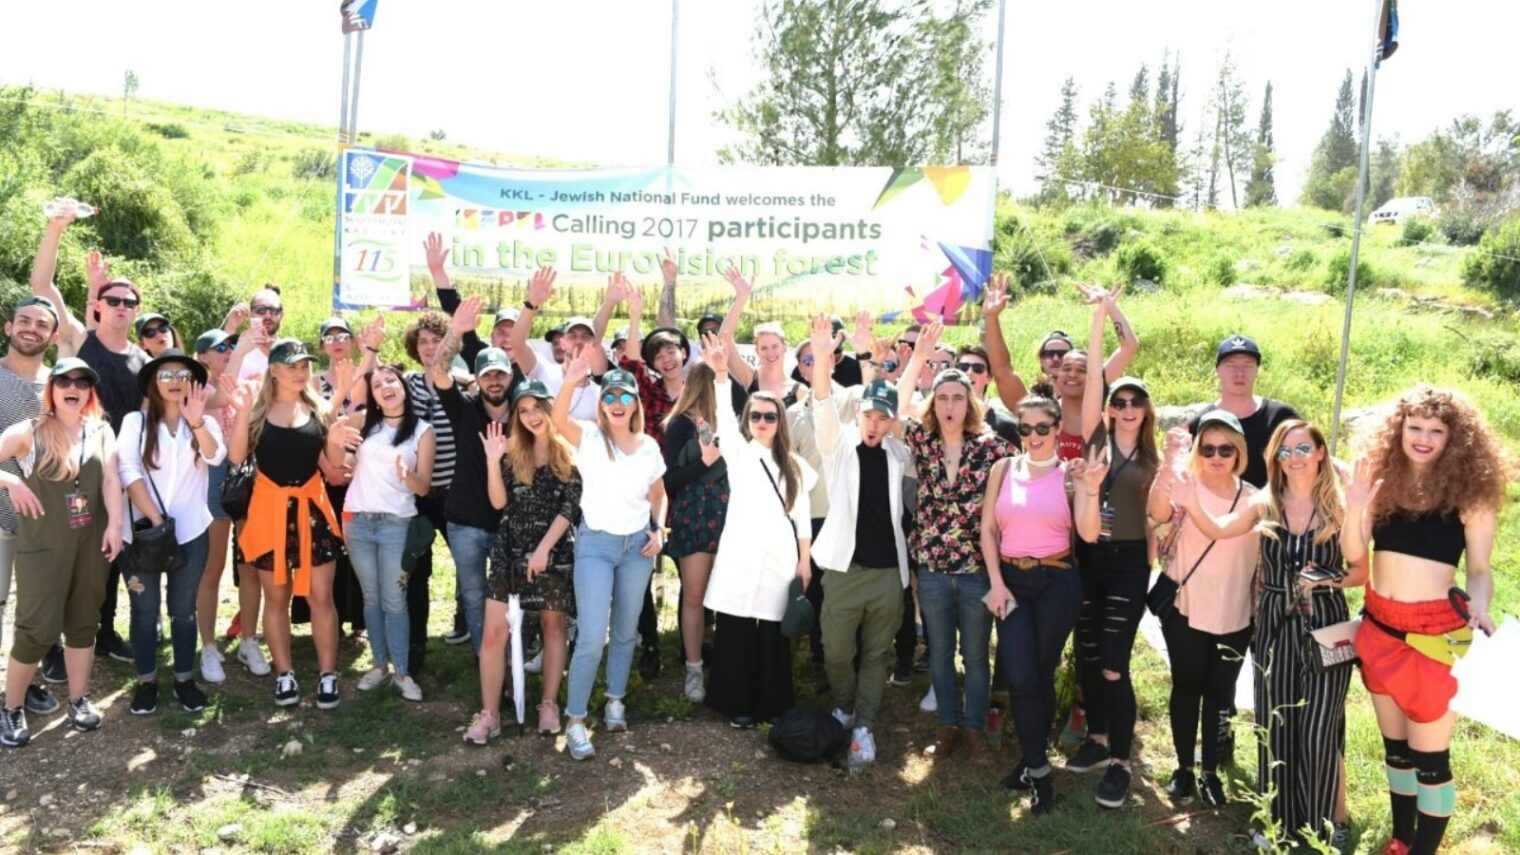 Eurovision 2017 contestants toured Israel from April 3-6 and planted trees representing their countries. Photo by Yosi Zeliger/KKL-JNF